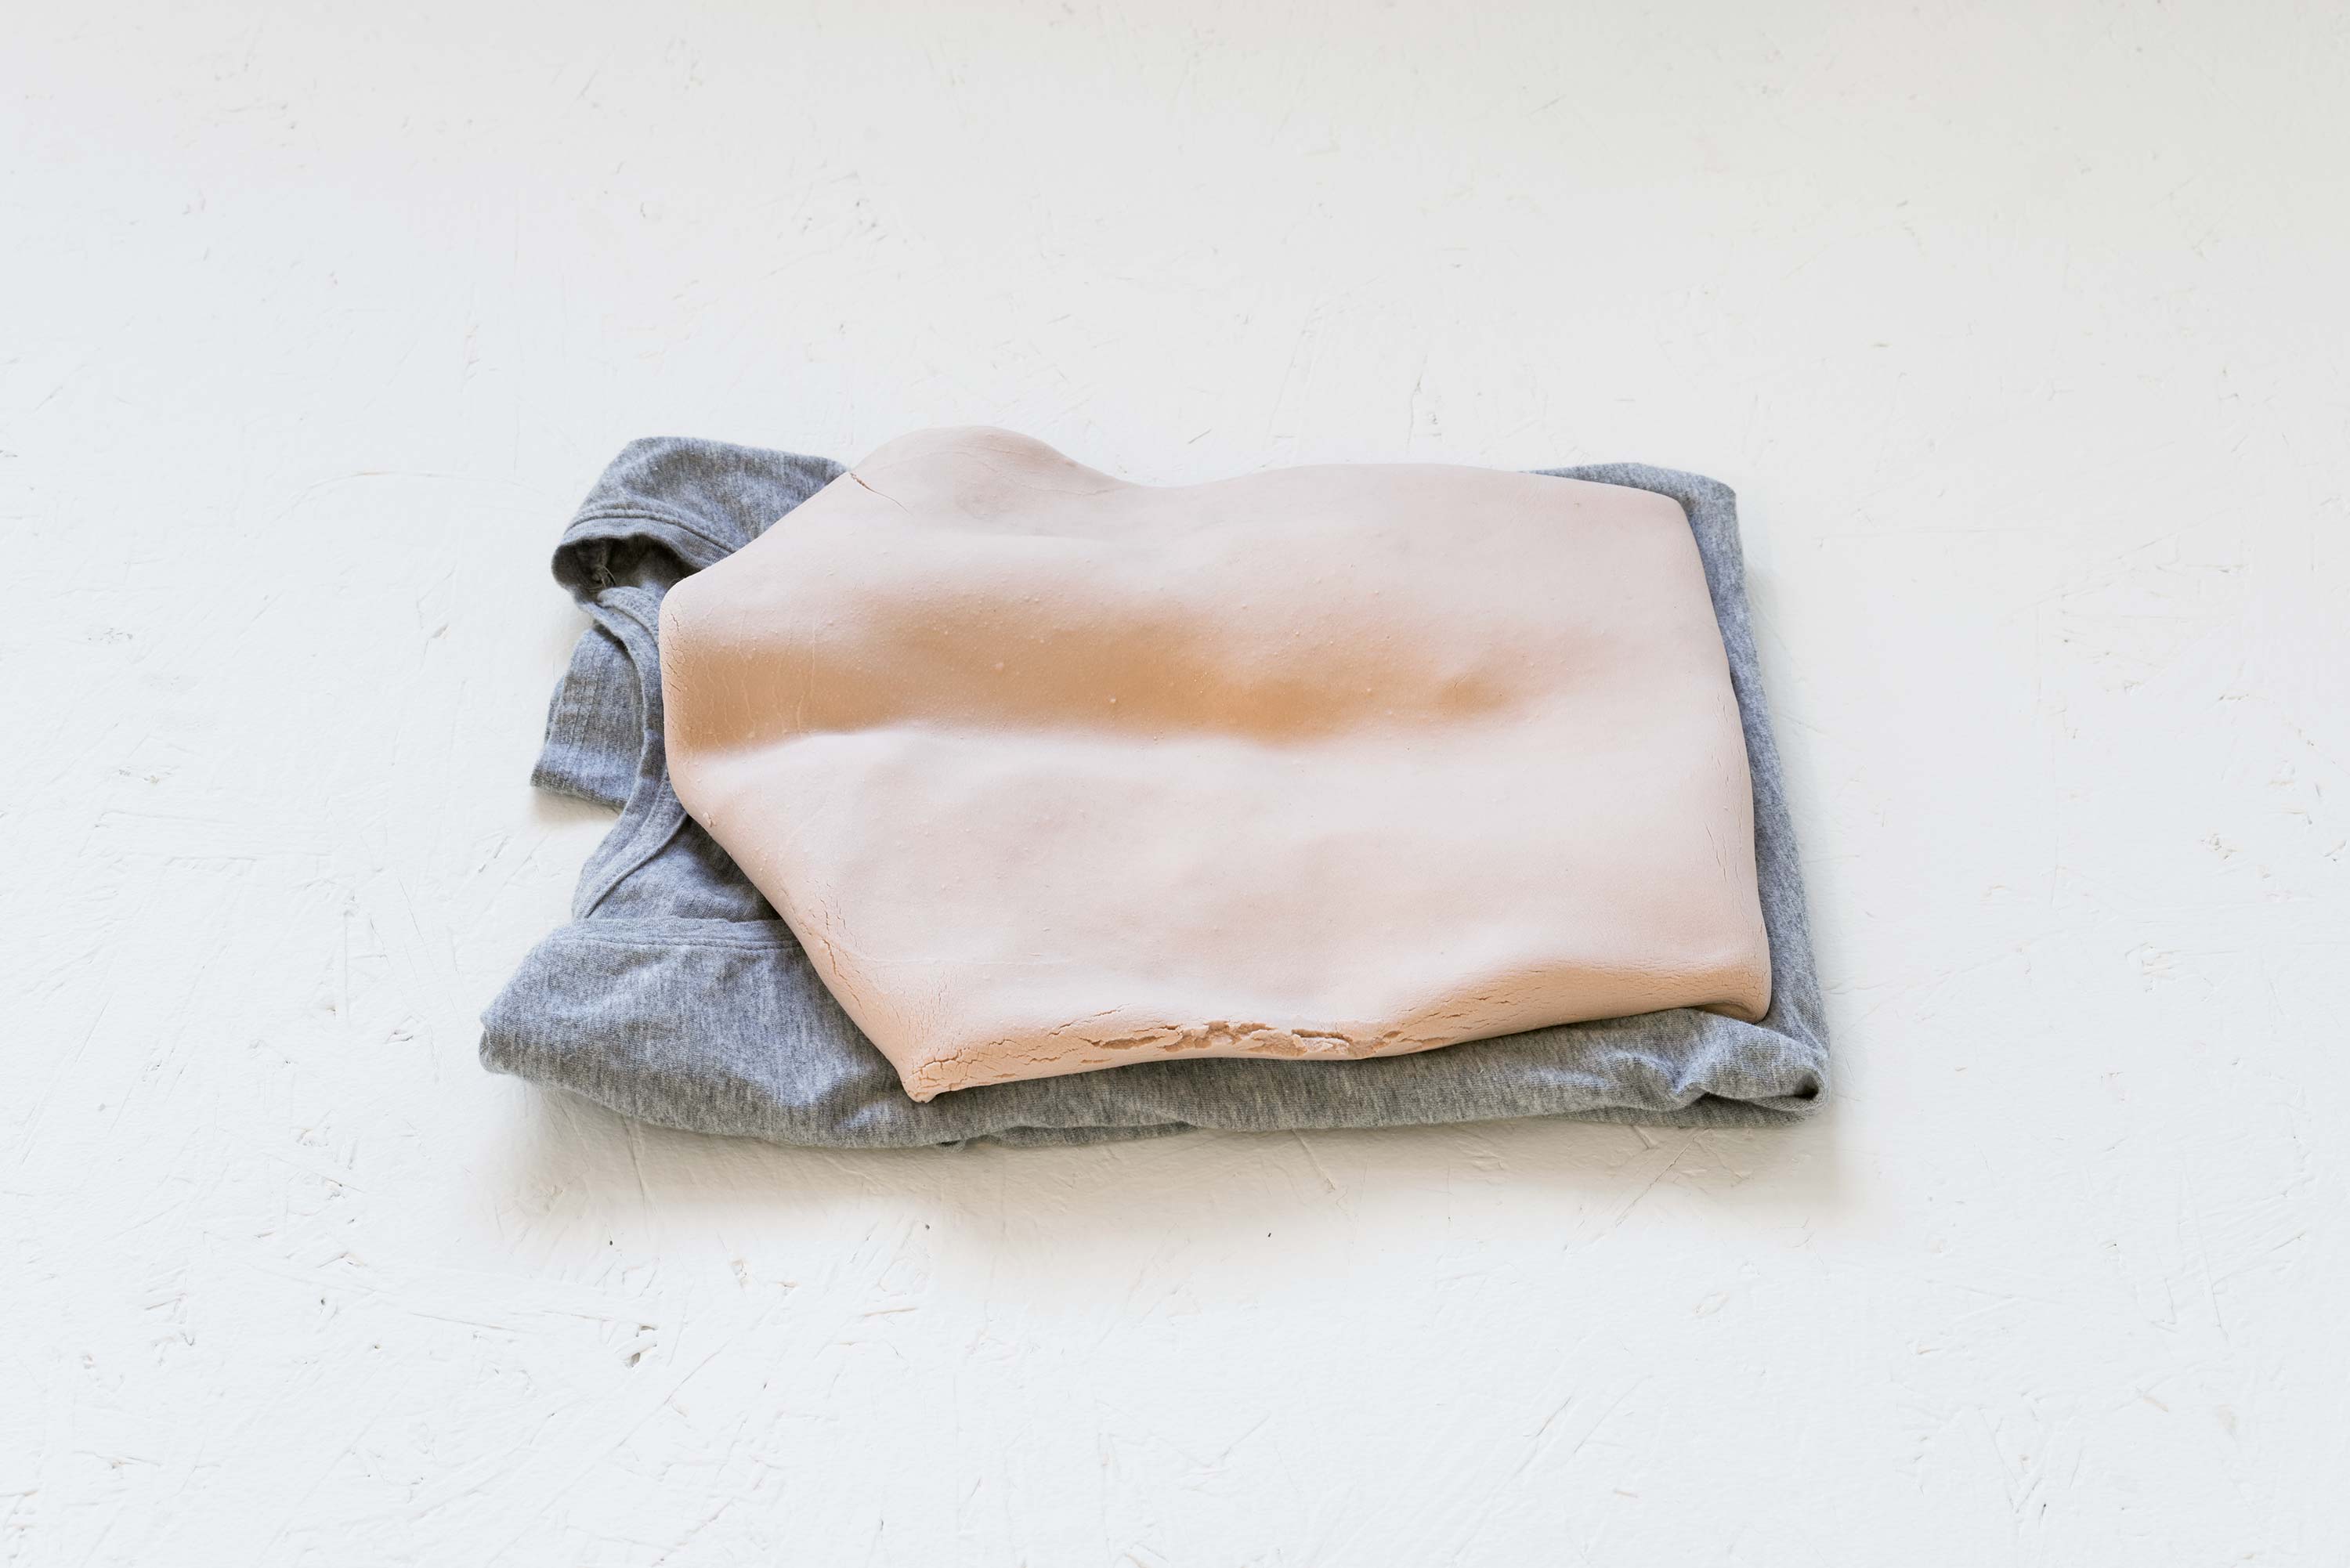 Kylie Lockwood<br>Folded<br>2013<br>Pigmented porcelain and cotton t-shirt<br>2.5 x 11 x 14 inches (6.4 x 28 x 35.6 cm)